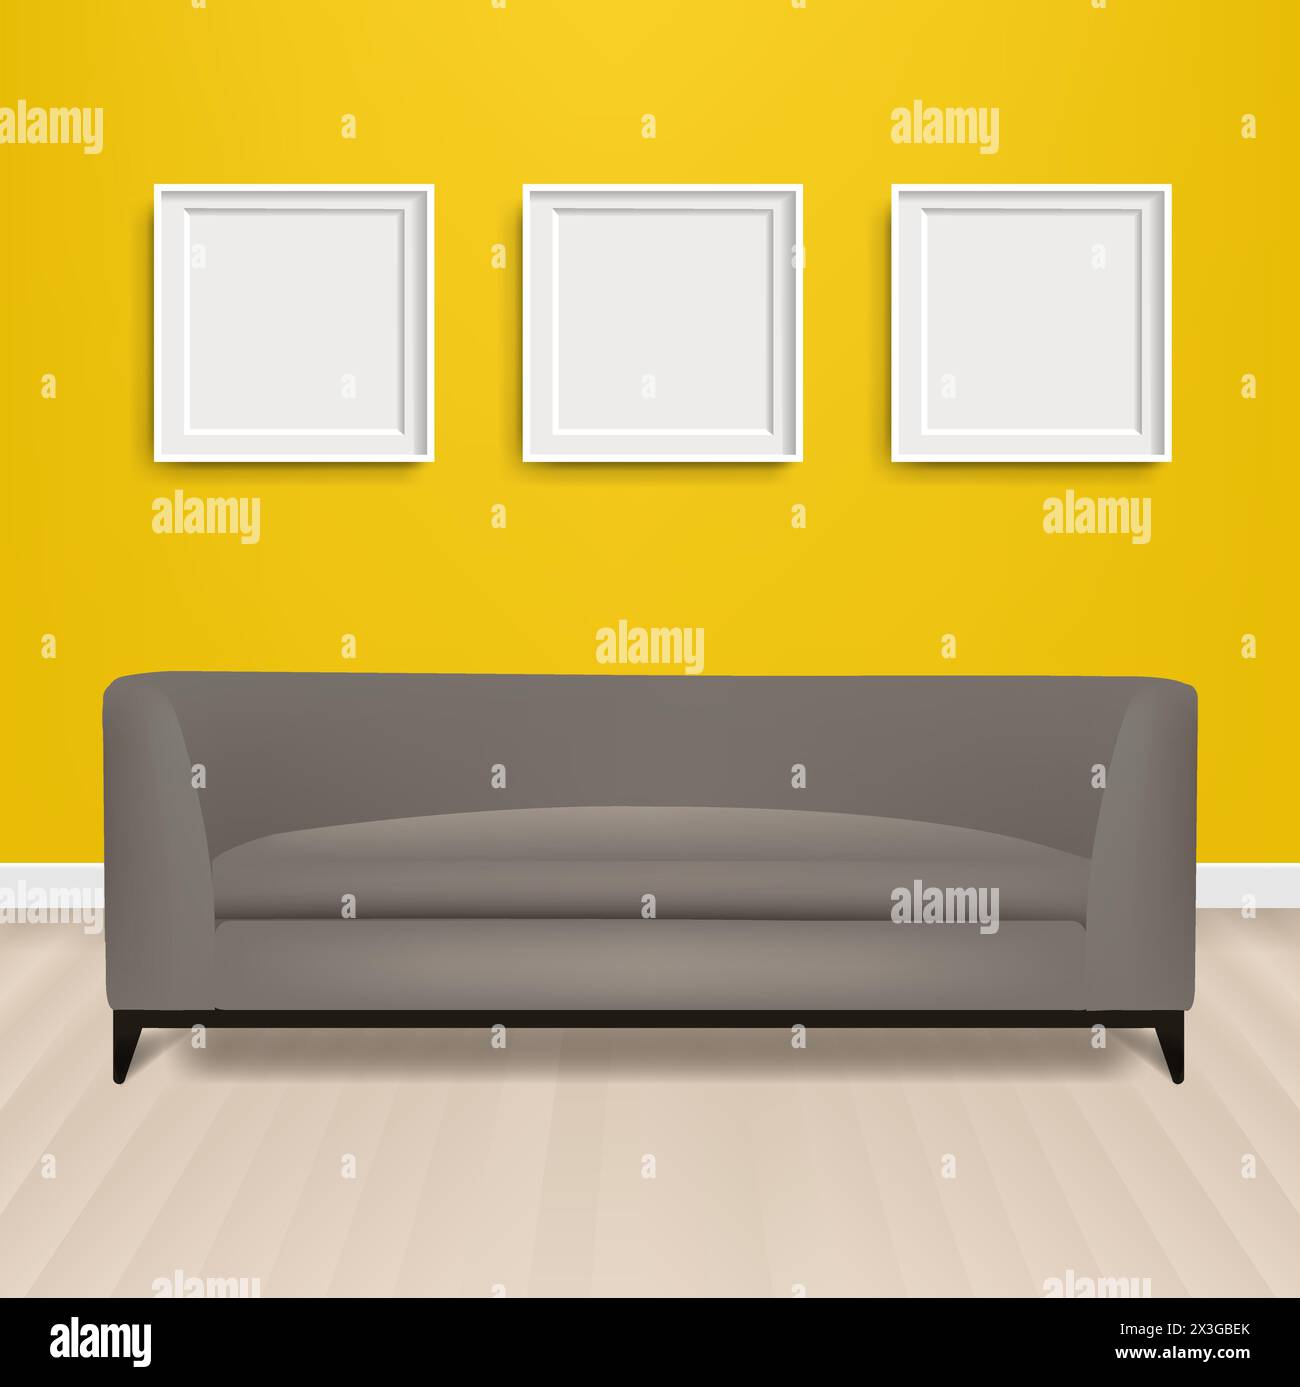 Grey Sofa Bed With And Picture Frame And Yellow Background With Gradient Mesh, Vector Illustration Stock Vector